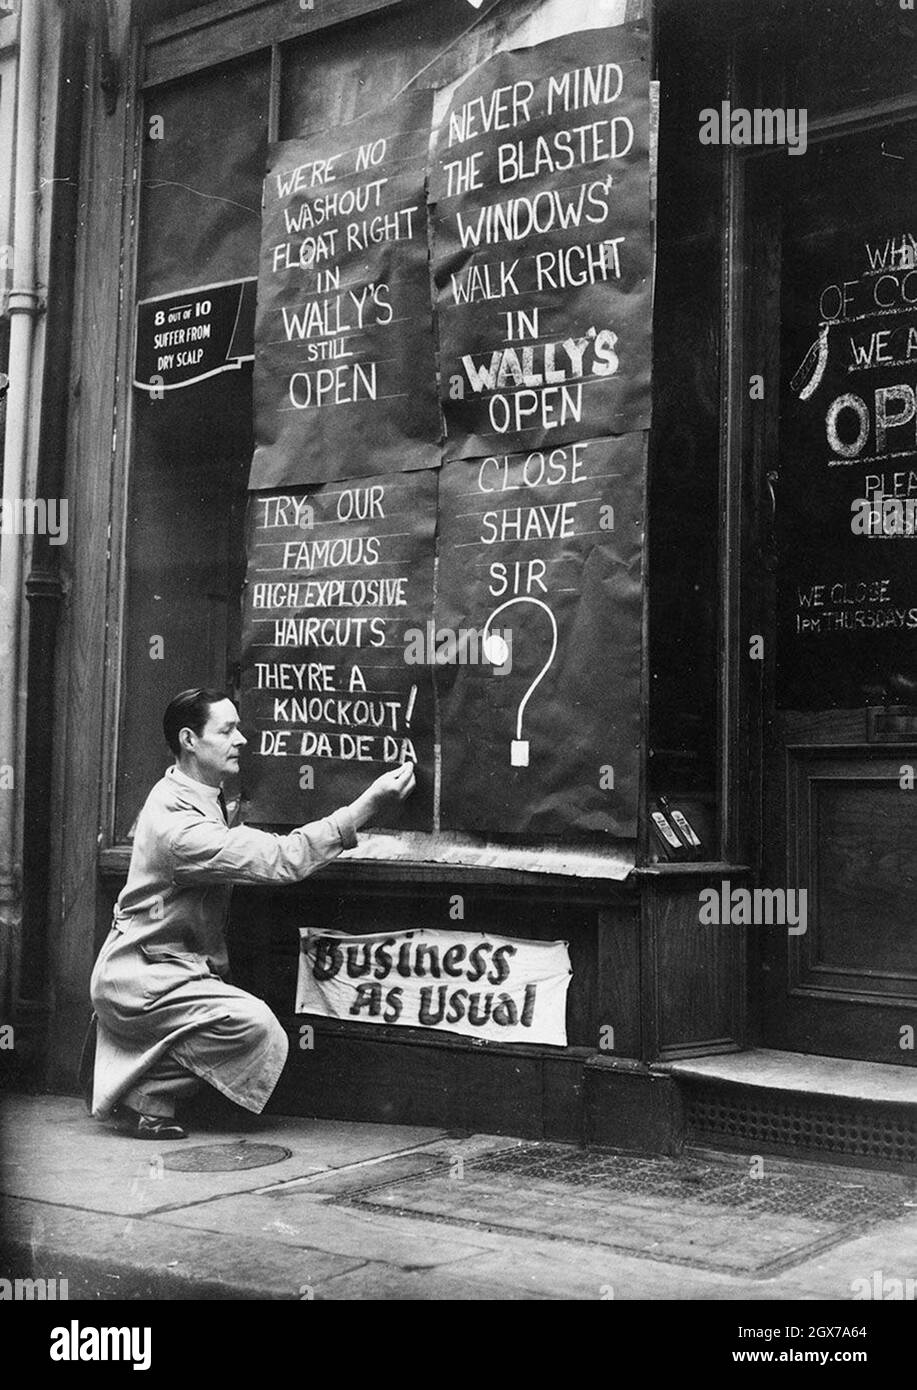 A business owner writing humourous messages on his shop to convey Business As Usual during teh London Blitz. Stock Photo